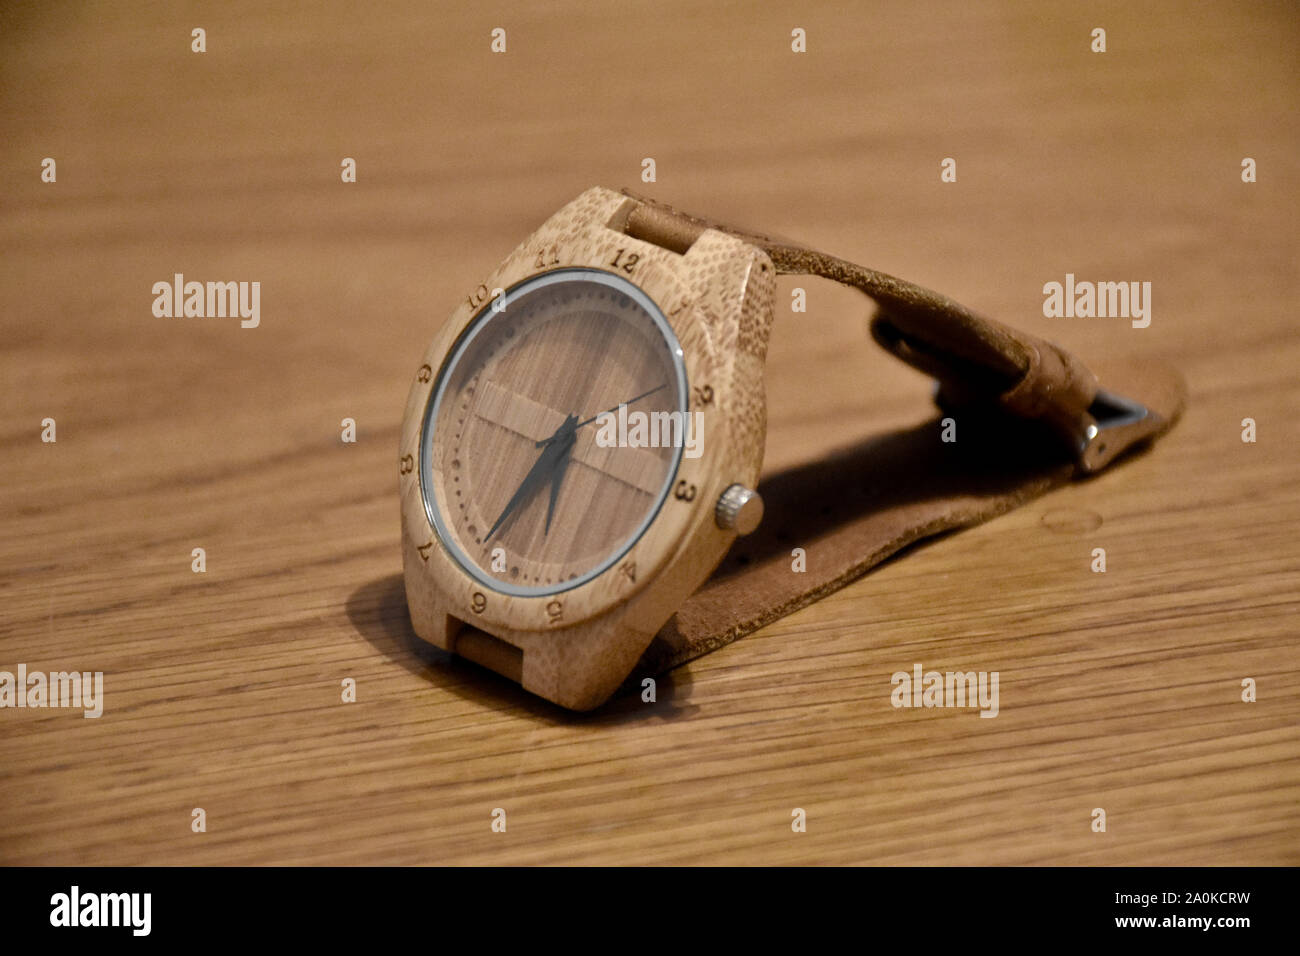 Eco-friendly, plastic-free and hand-made bamboo watch with leather strap from Thailand on a wooden table Stock Photo